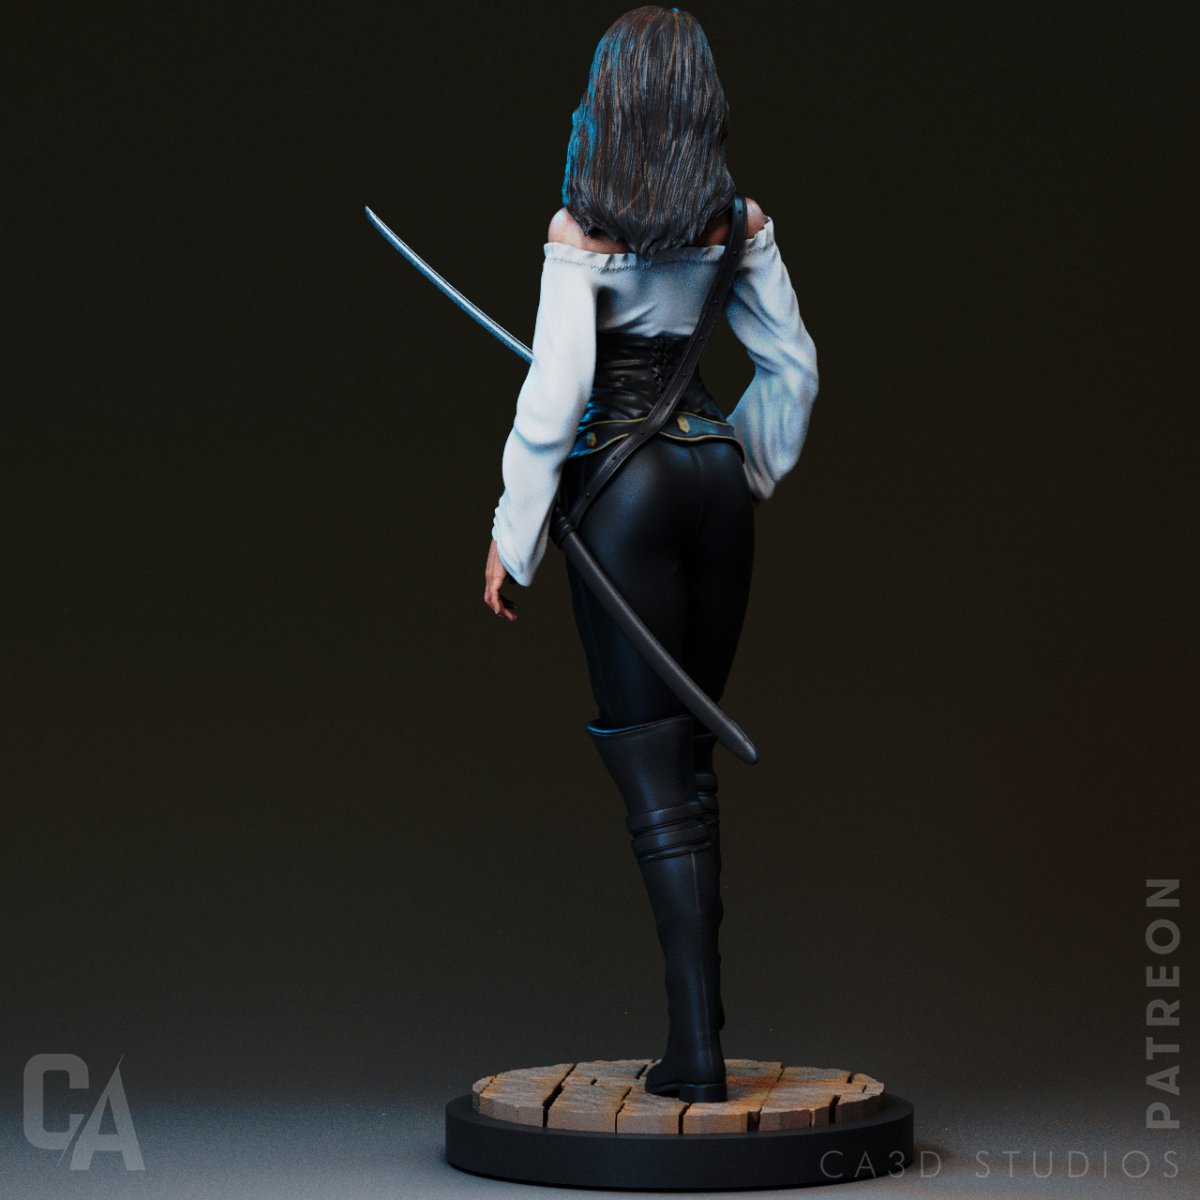 Angelica Teach 3d printed Miniature Scaled Statue Figure SFW NSFW